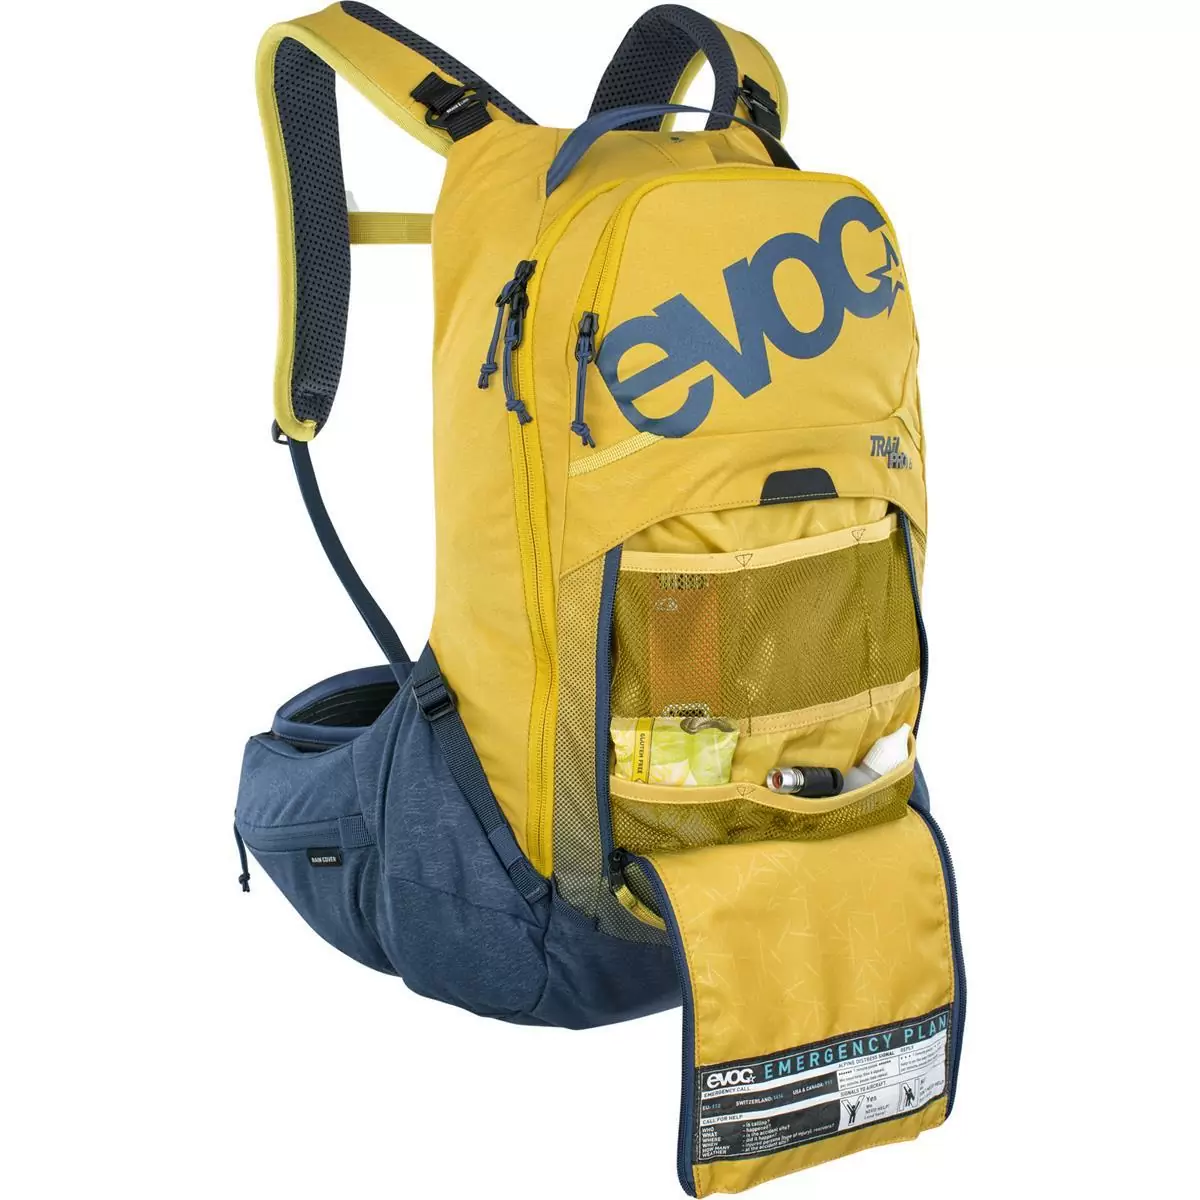 Trail Pro backpack 16 liters Curry – Denim with back protector size S/M #1